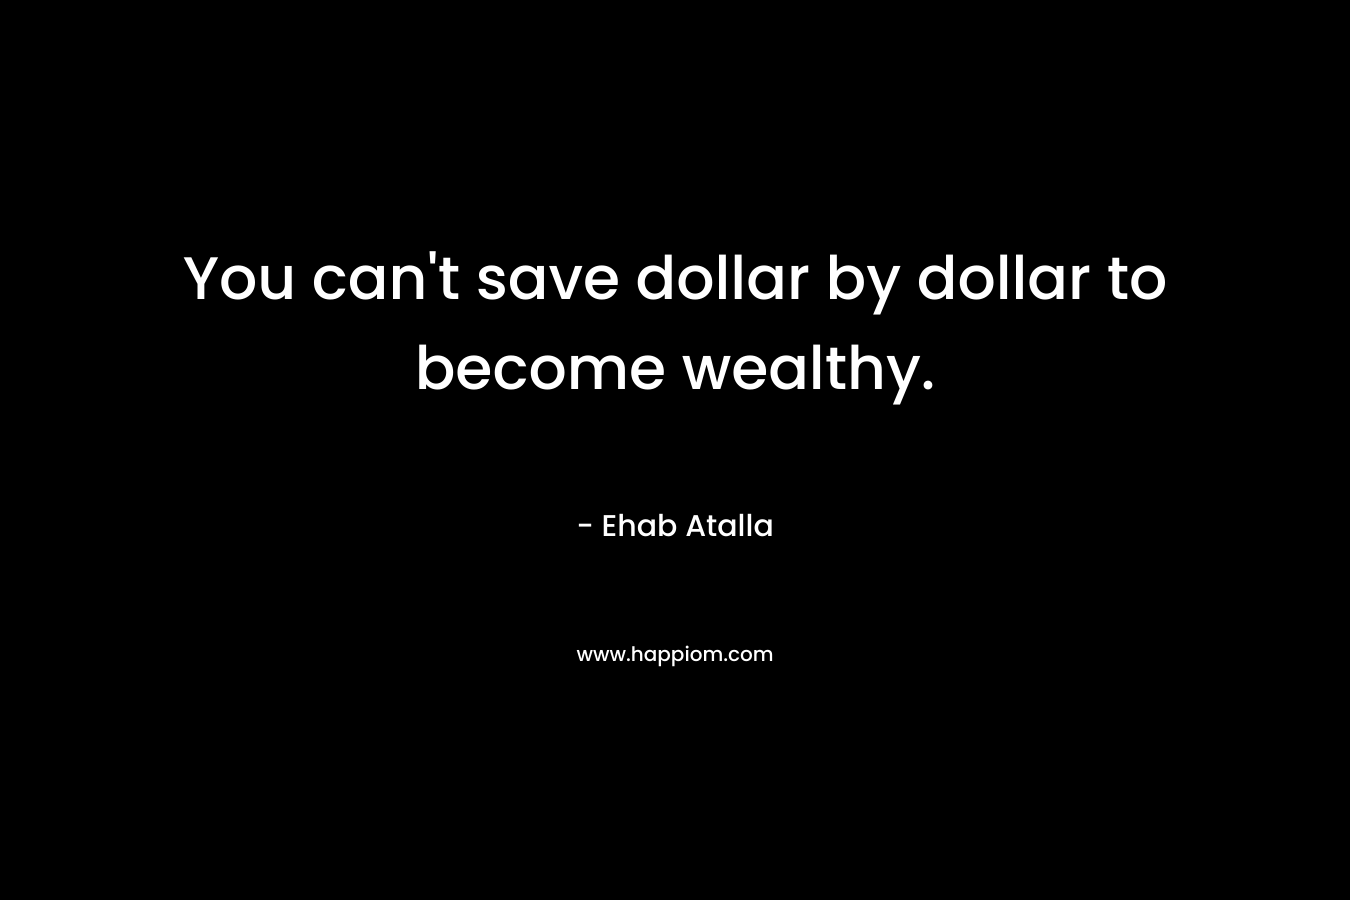 You can't save dollar by dollar to become wealthy.